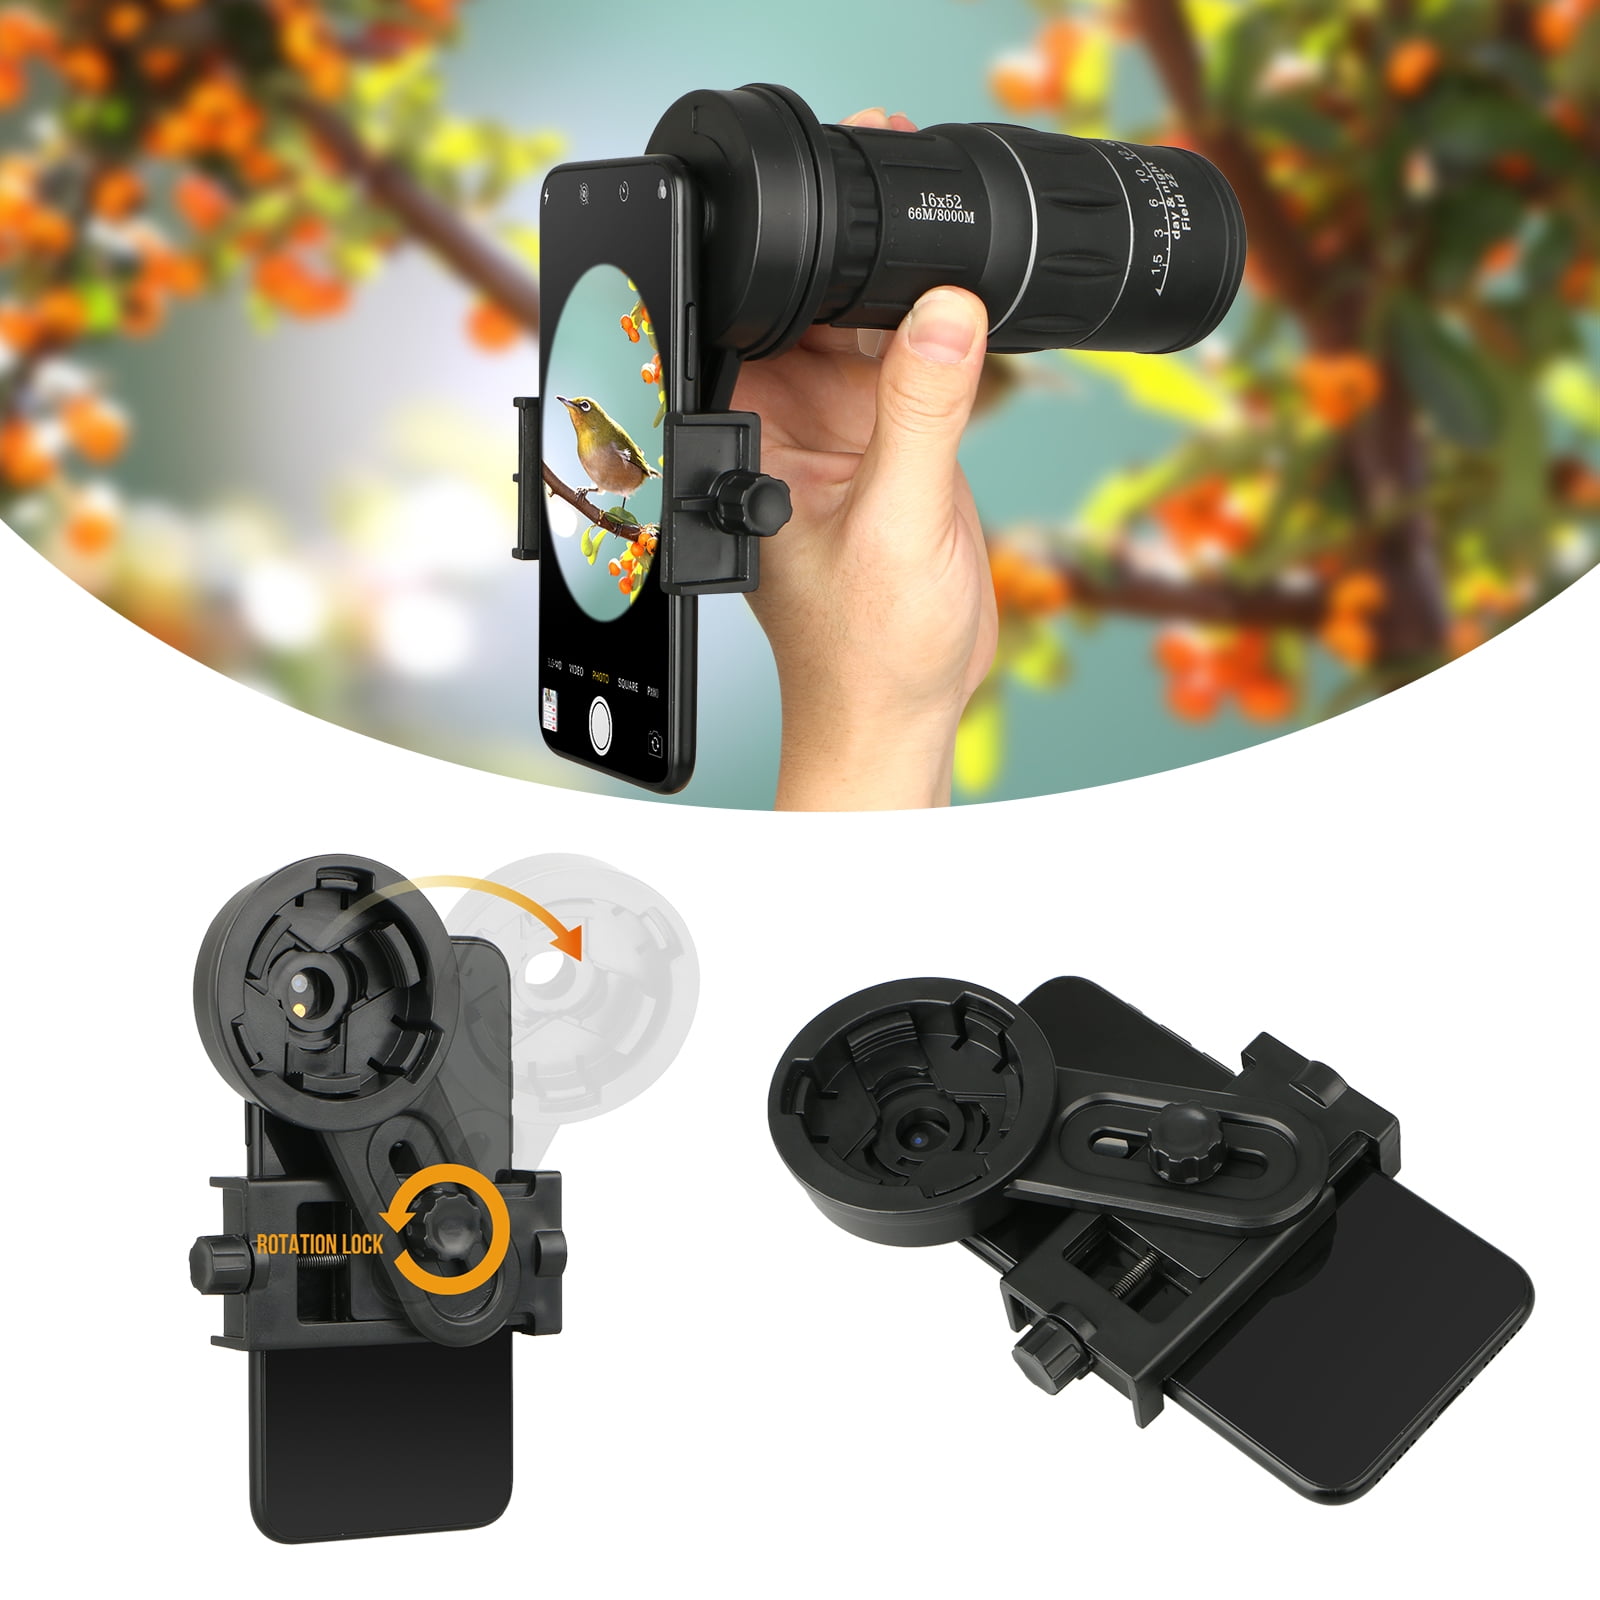 Telescope Stand Holder Compatible with Any Point and Shoot Camera Binoculars Monocular Spotting Scopes Telescopes and Microscopes Fully Metal Telescope Camera Adapter,Smartphone Adapter 